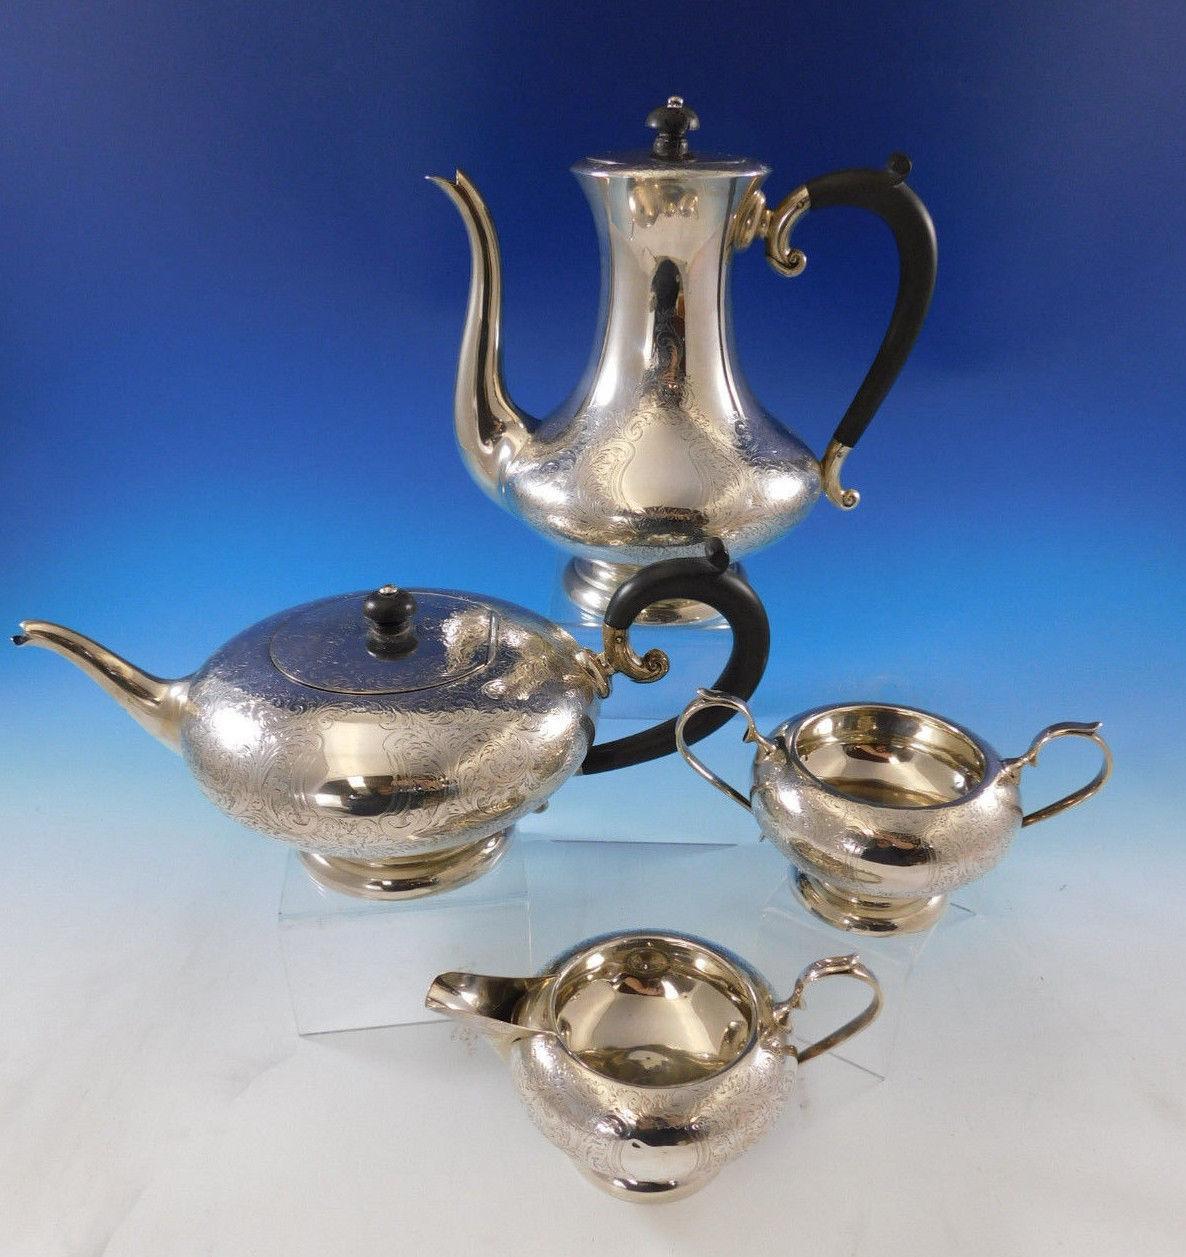 Incredible four-piece sterling silver tea set by Charles S. Green & Co, Birmingham, circa 1940 with beautiful engraved detail presented in a beautiful vintage storage box (box is not original to the tea set, but fits the tea set wonderfully).

This